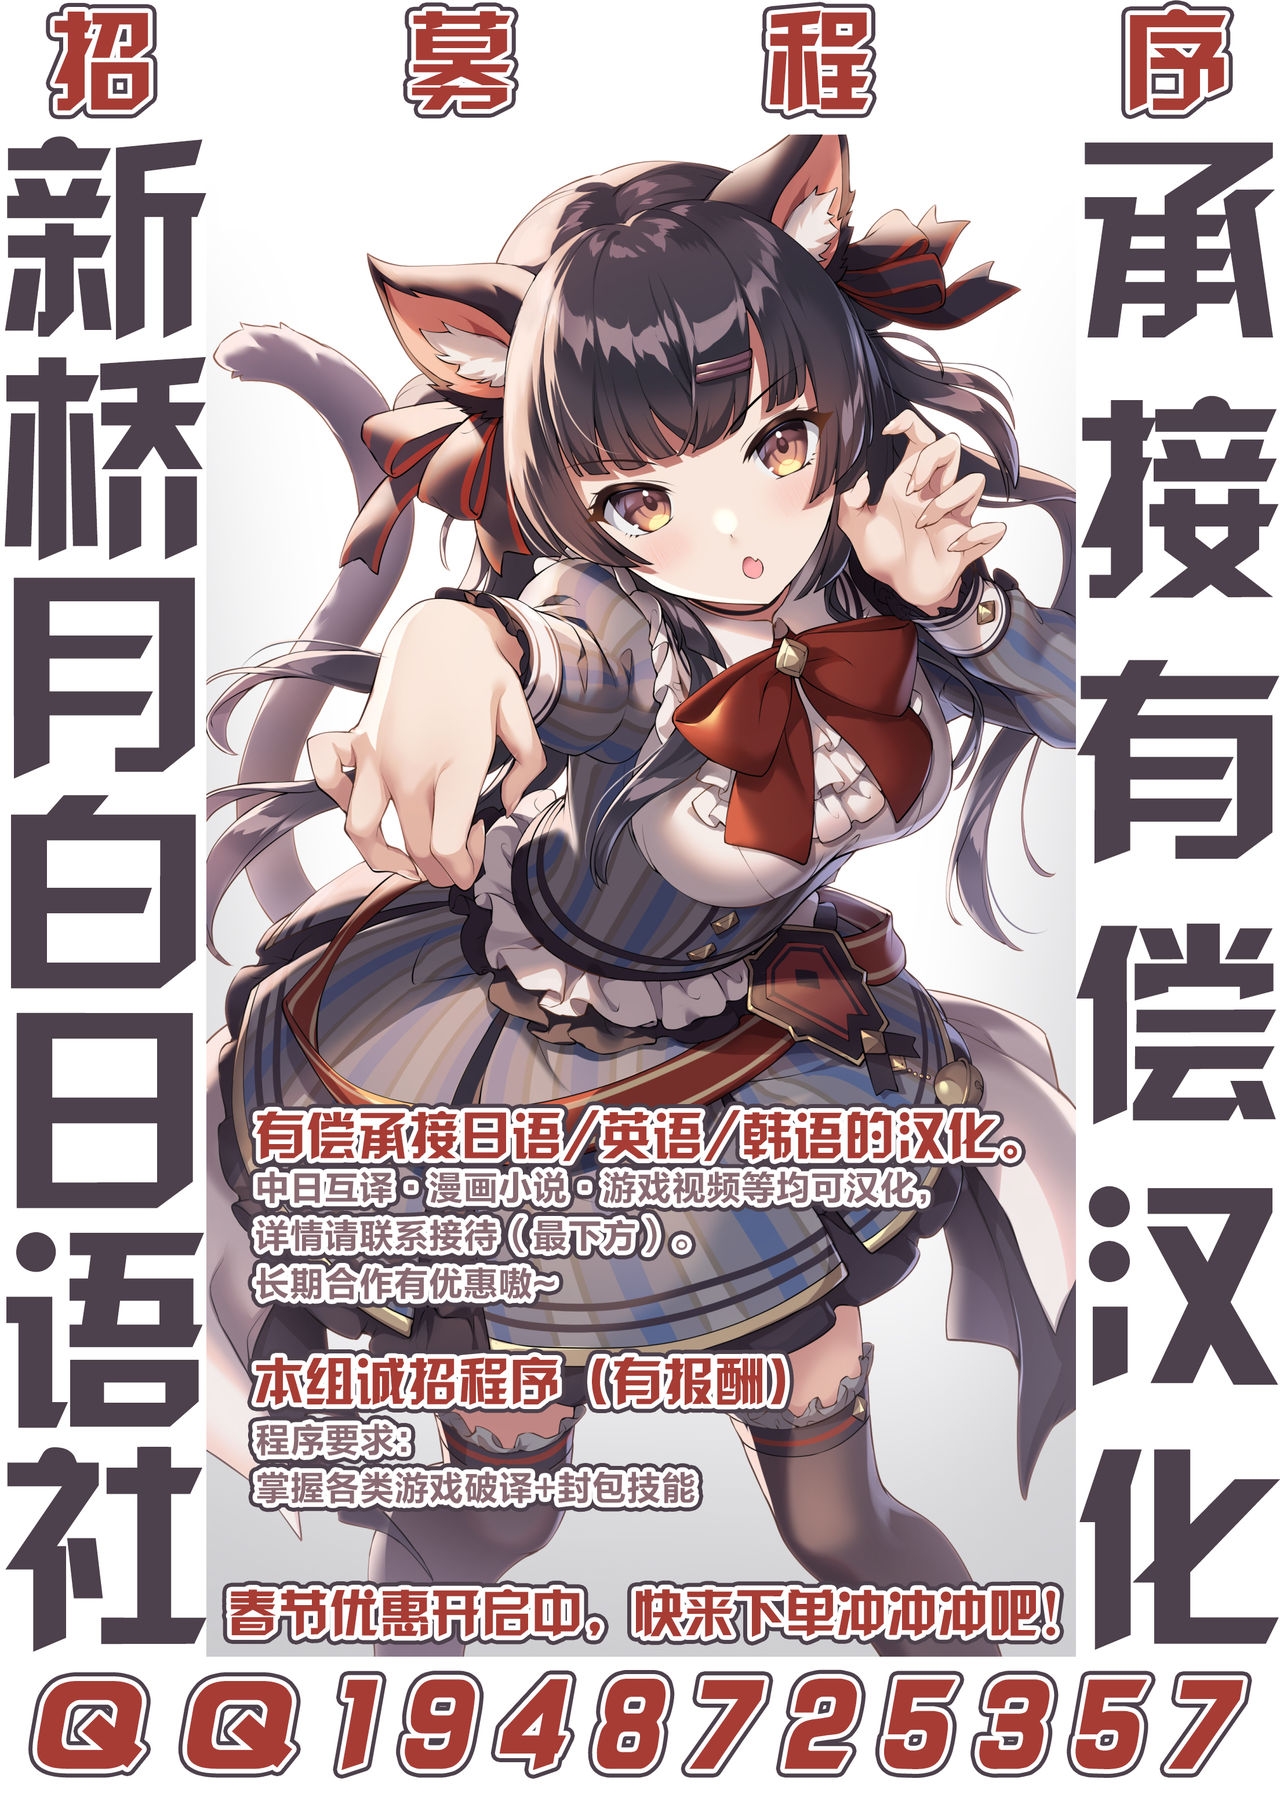 [goat-kid] Scattered issue 2 [Chinese] [逃亡者x新桥月白日语社汉化] 47